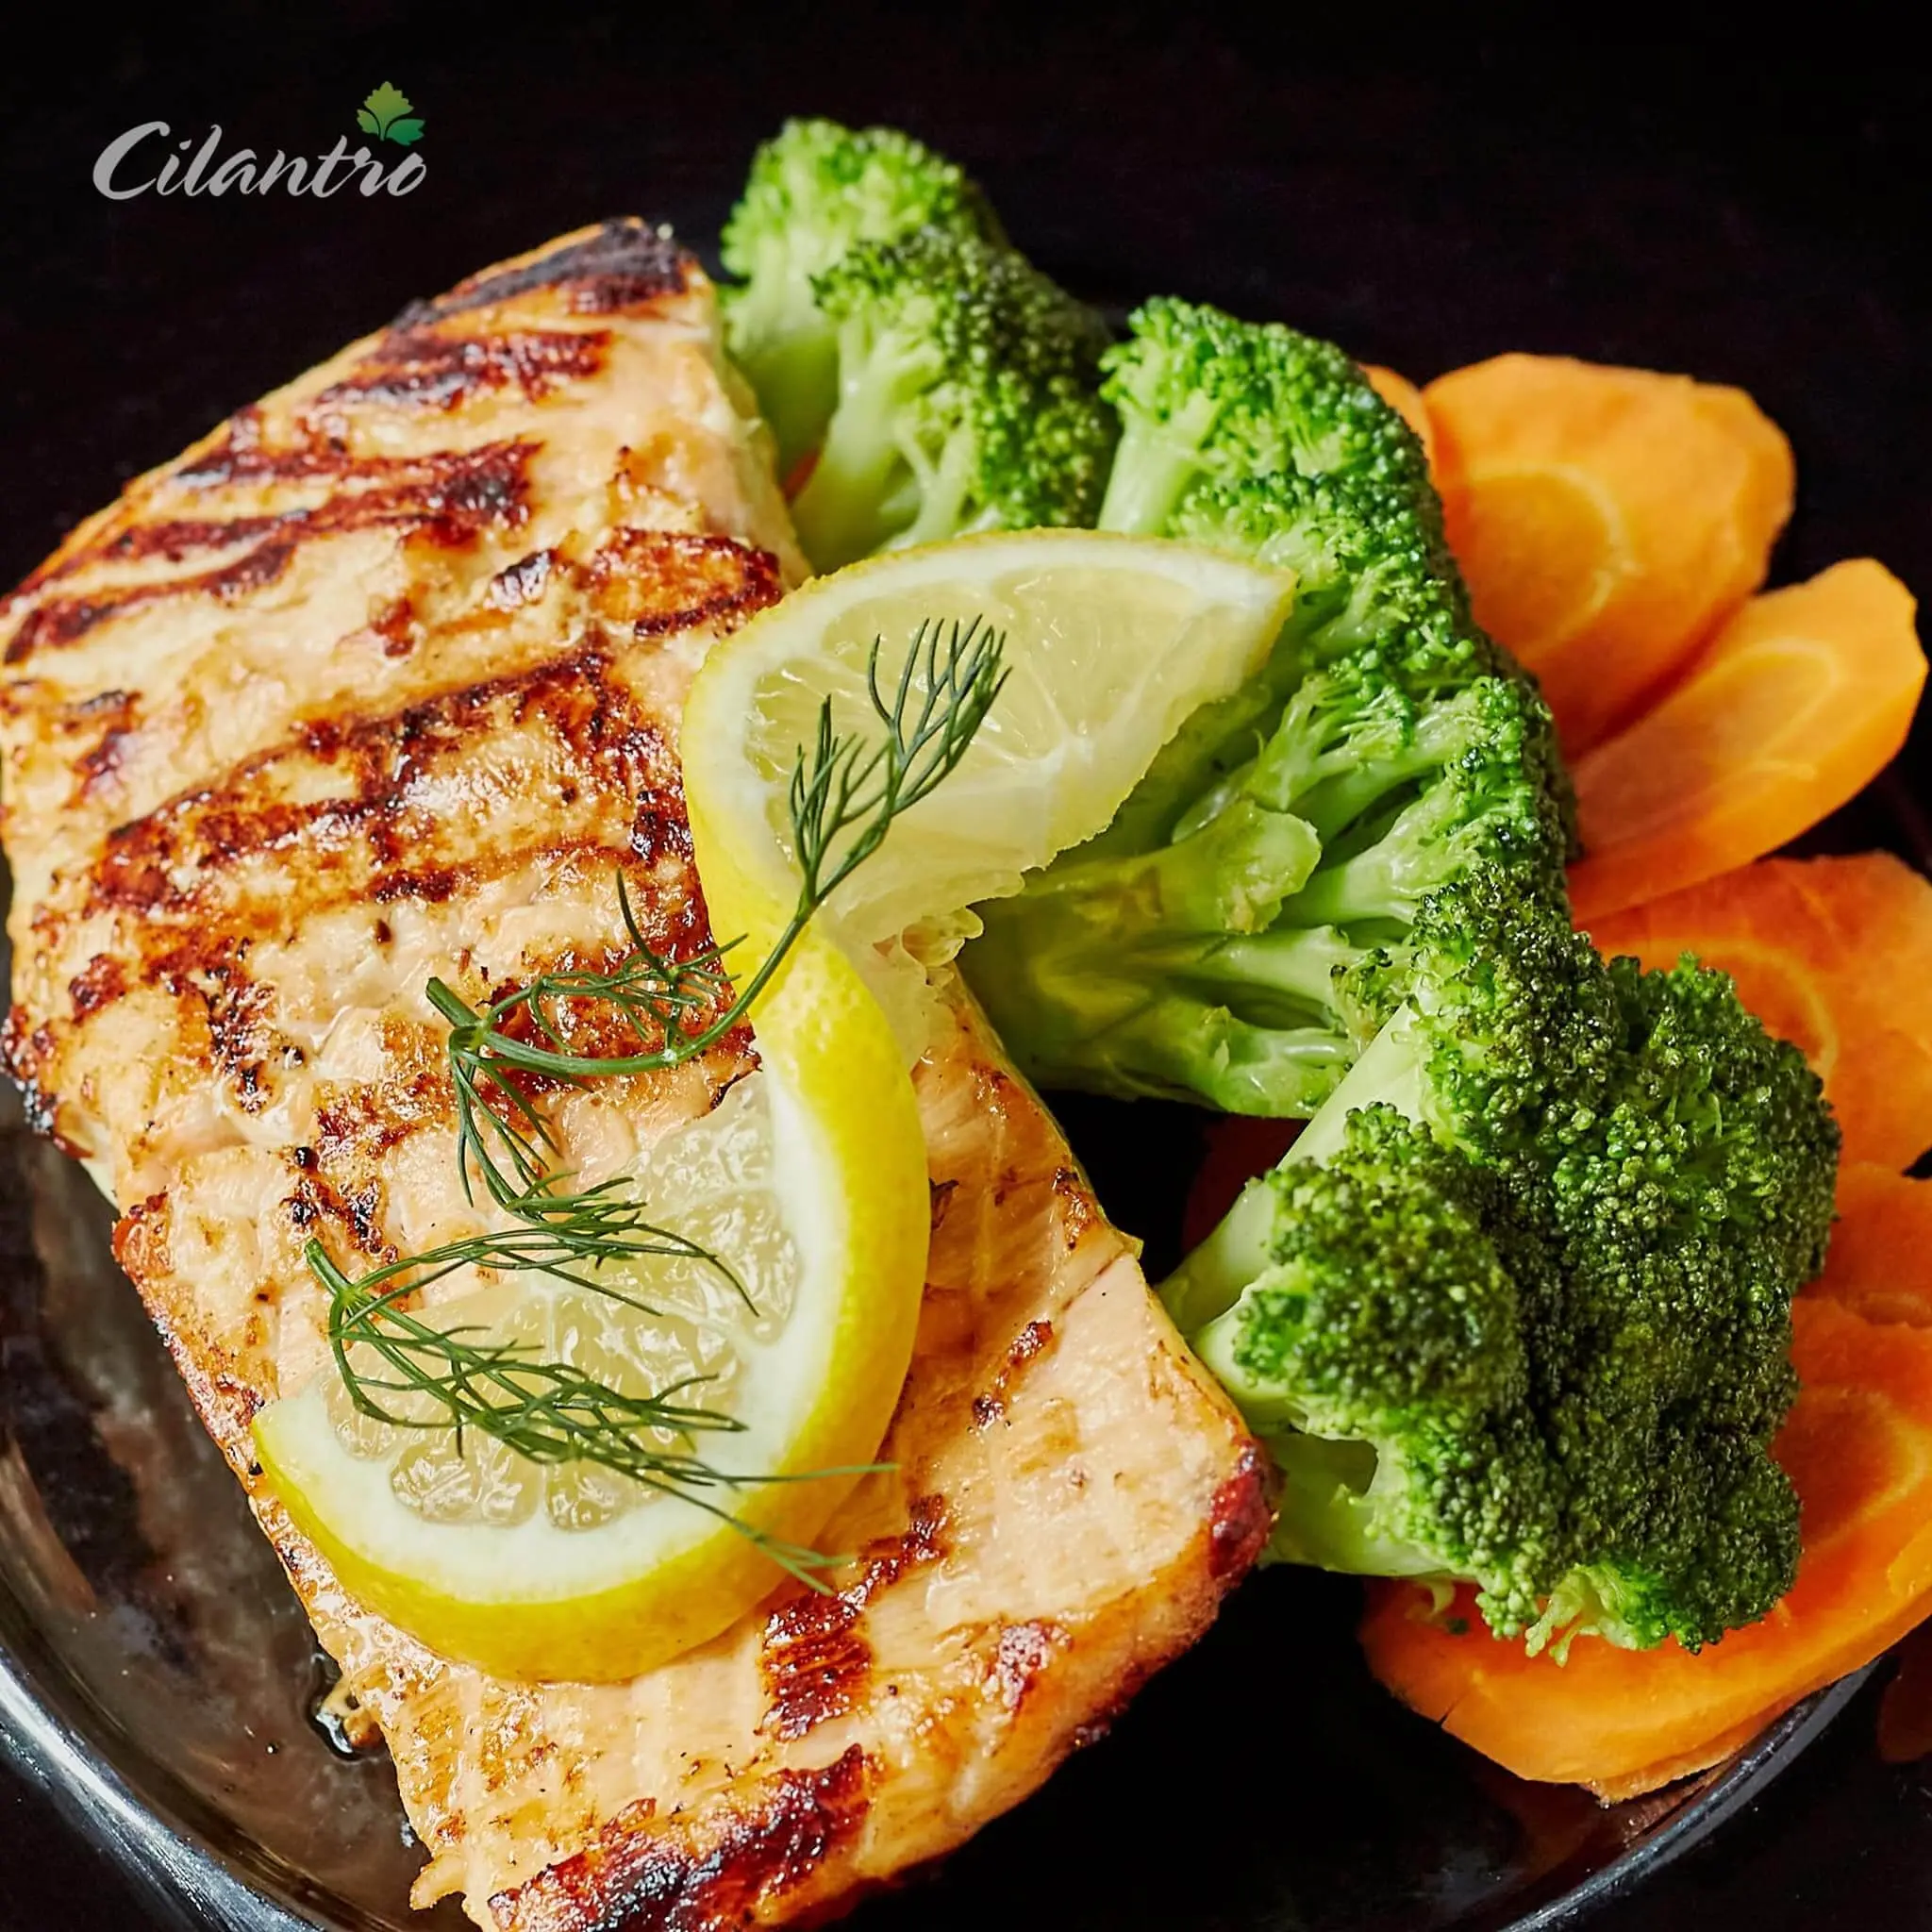 Grilled and juicy Salmon with grilled veggies